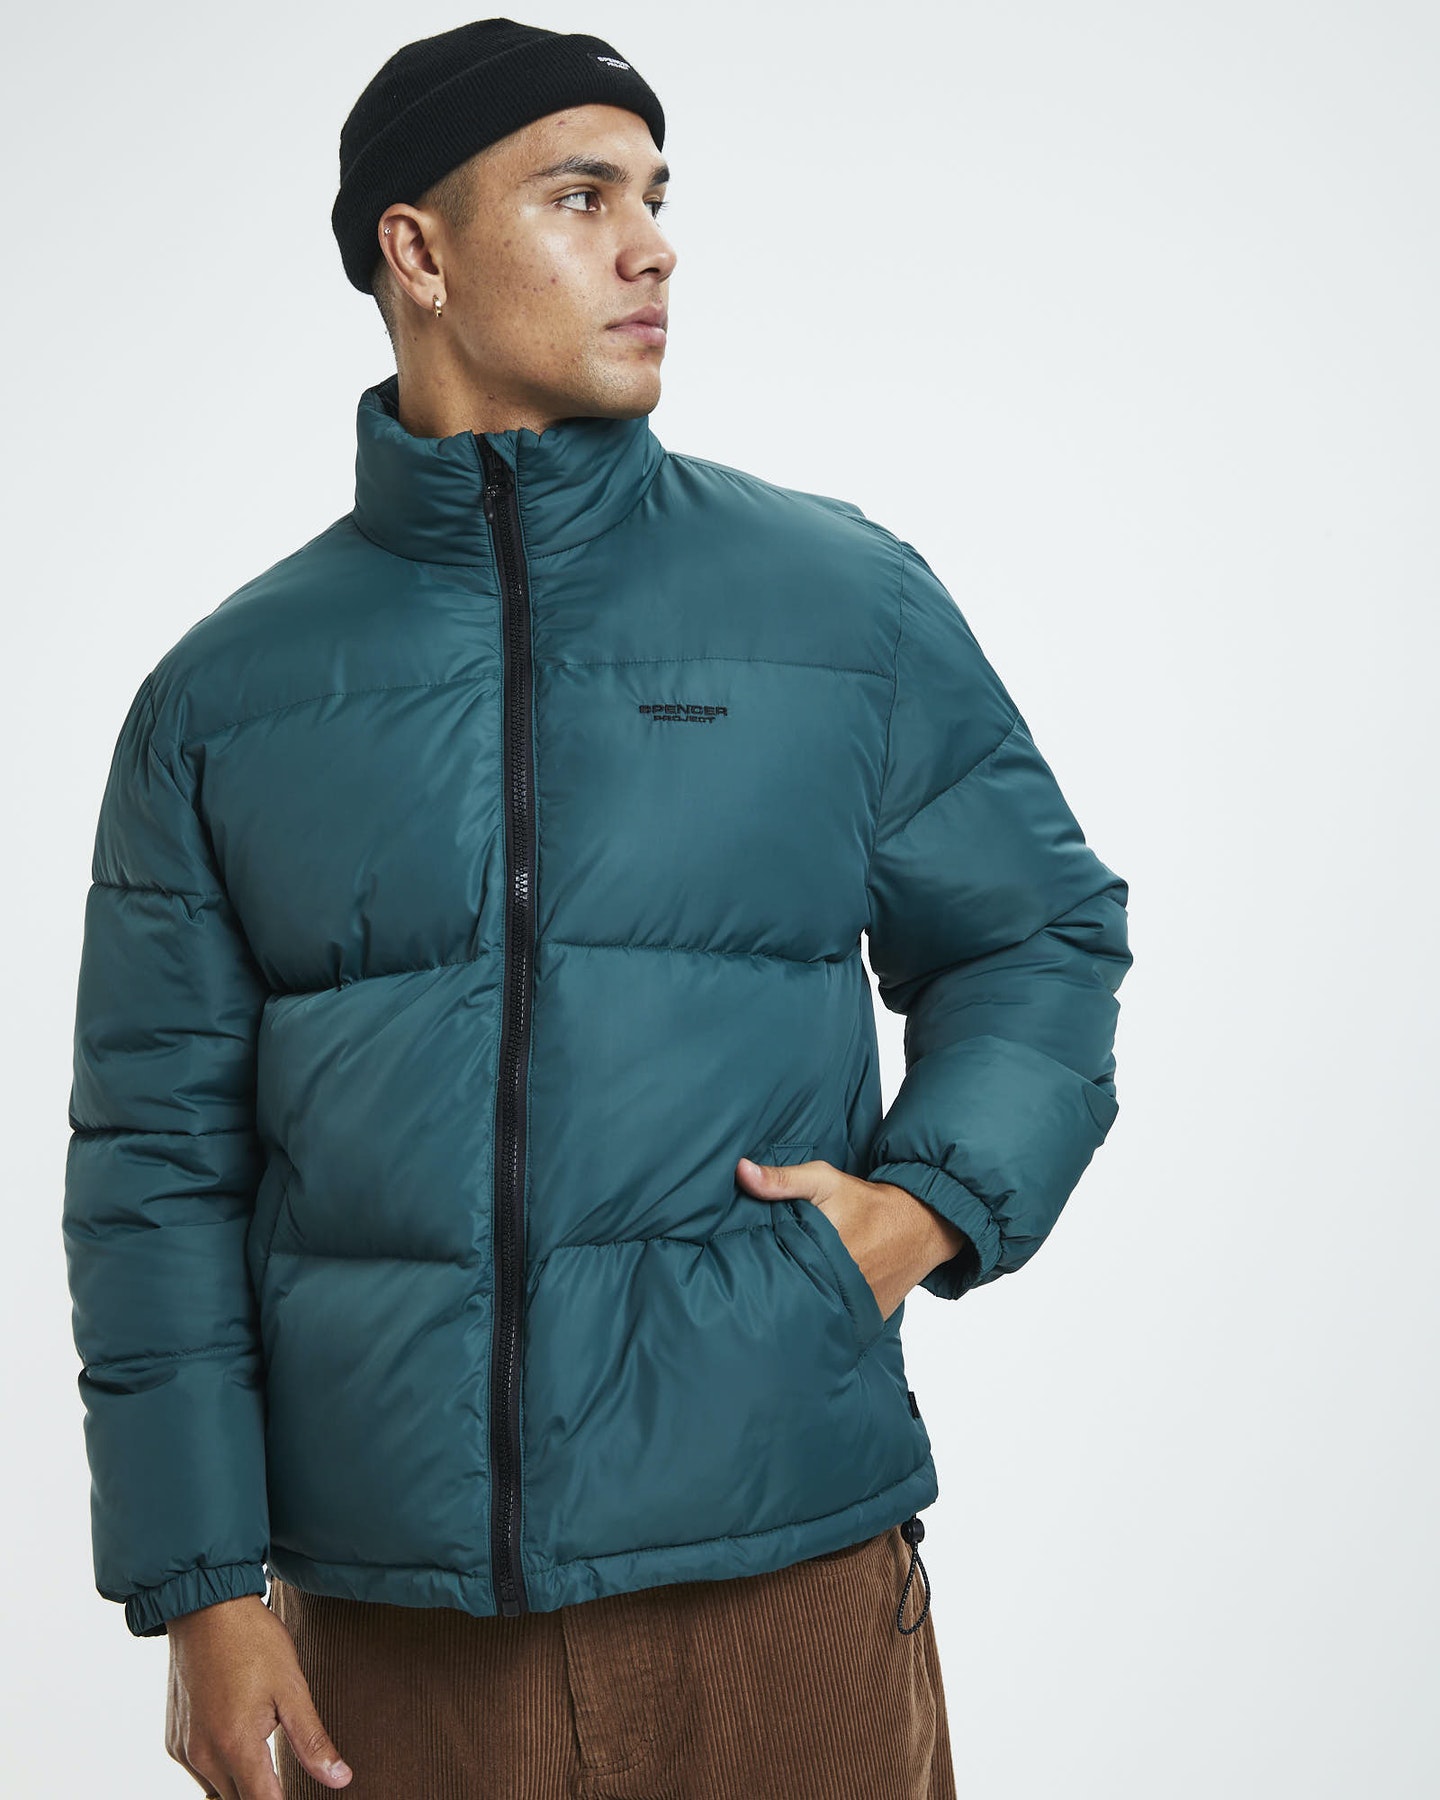 Buy Burnside 90's Puffer Jacket & Pay Later | humm